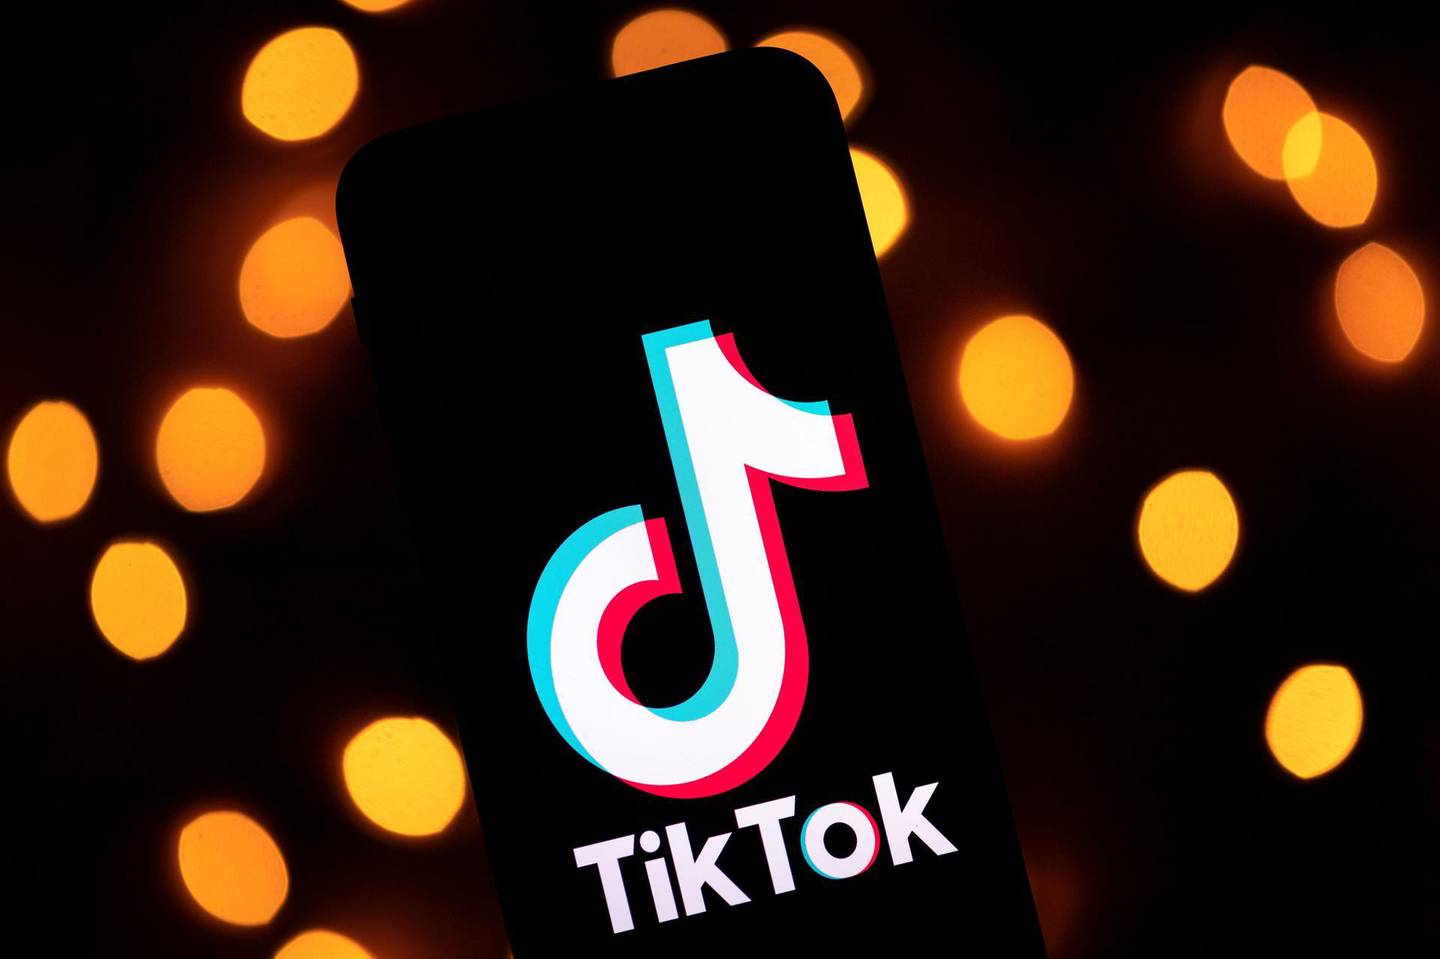 (FILES) This file photo taken on November 21, 2019 shows the logo of the social media video sharing app Tiktok displayed on a tablet screen in Paris. Microsoft announced on August 2, 2020 it would continue talks to acquire the US operations of popular video-sharing app TikTok, after meeting with President Donald Trump who seemingly backed off his earlier threats to ban the Chinese-owned platform. / AFP / Lionel BONAVENTURE
